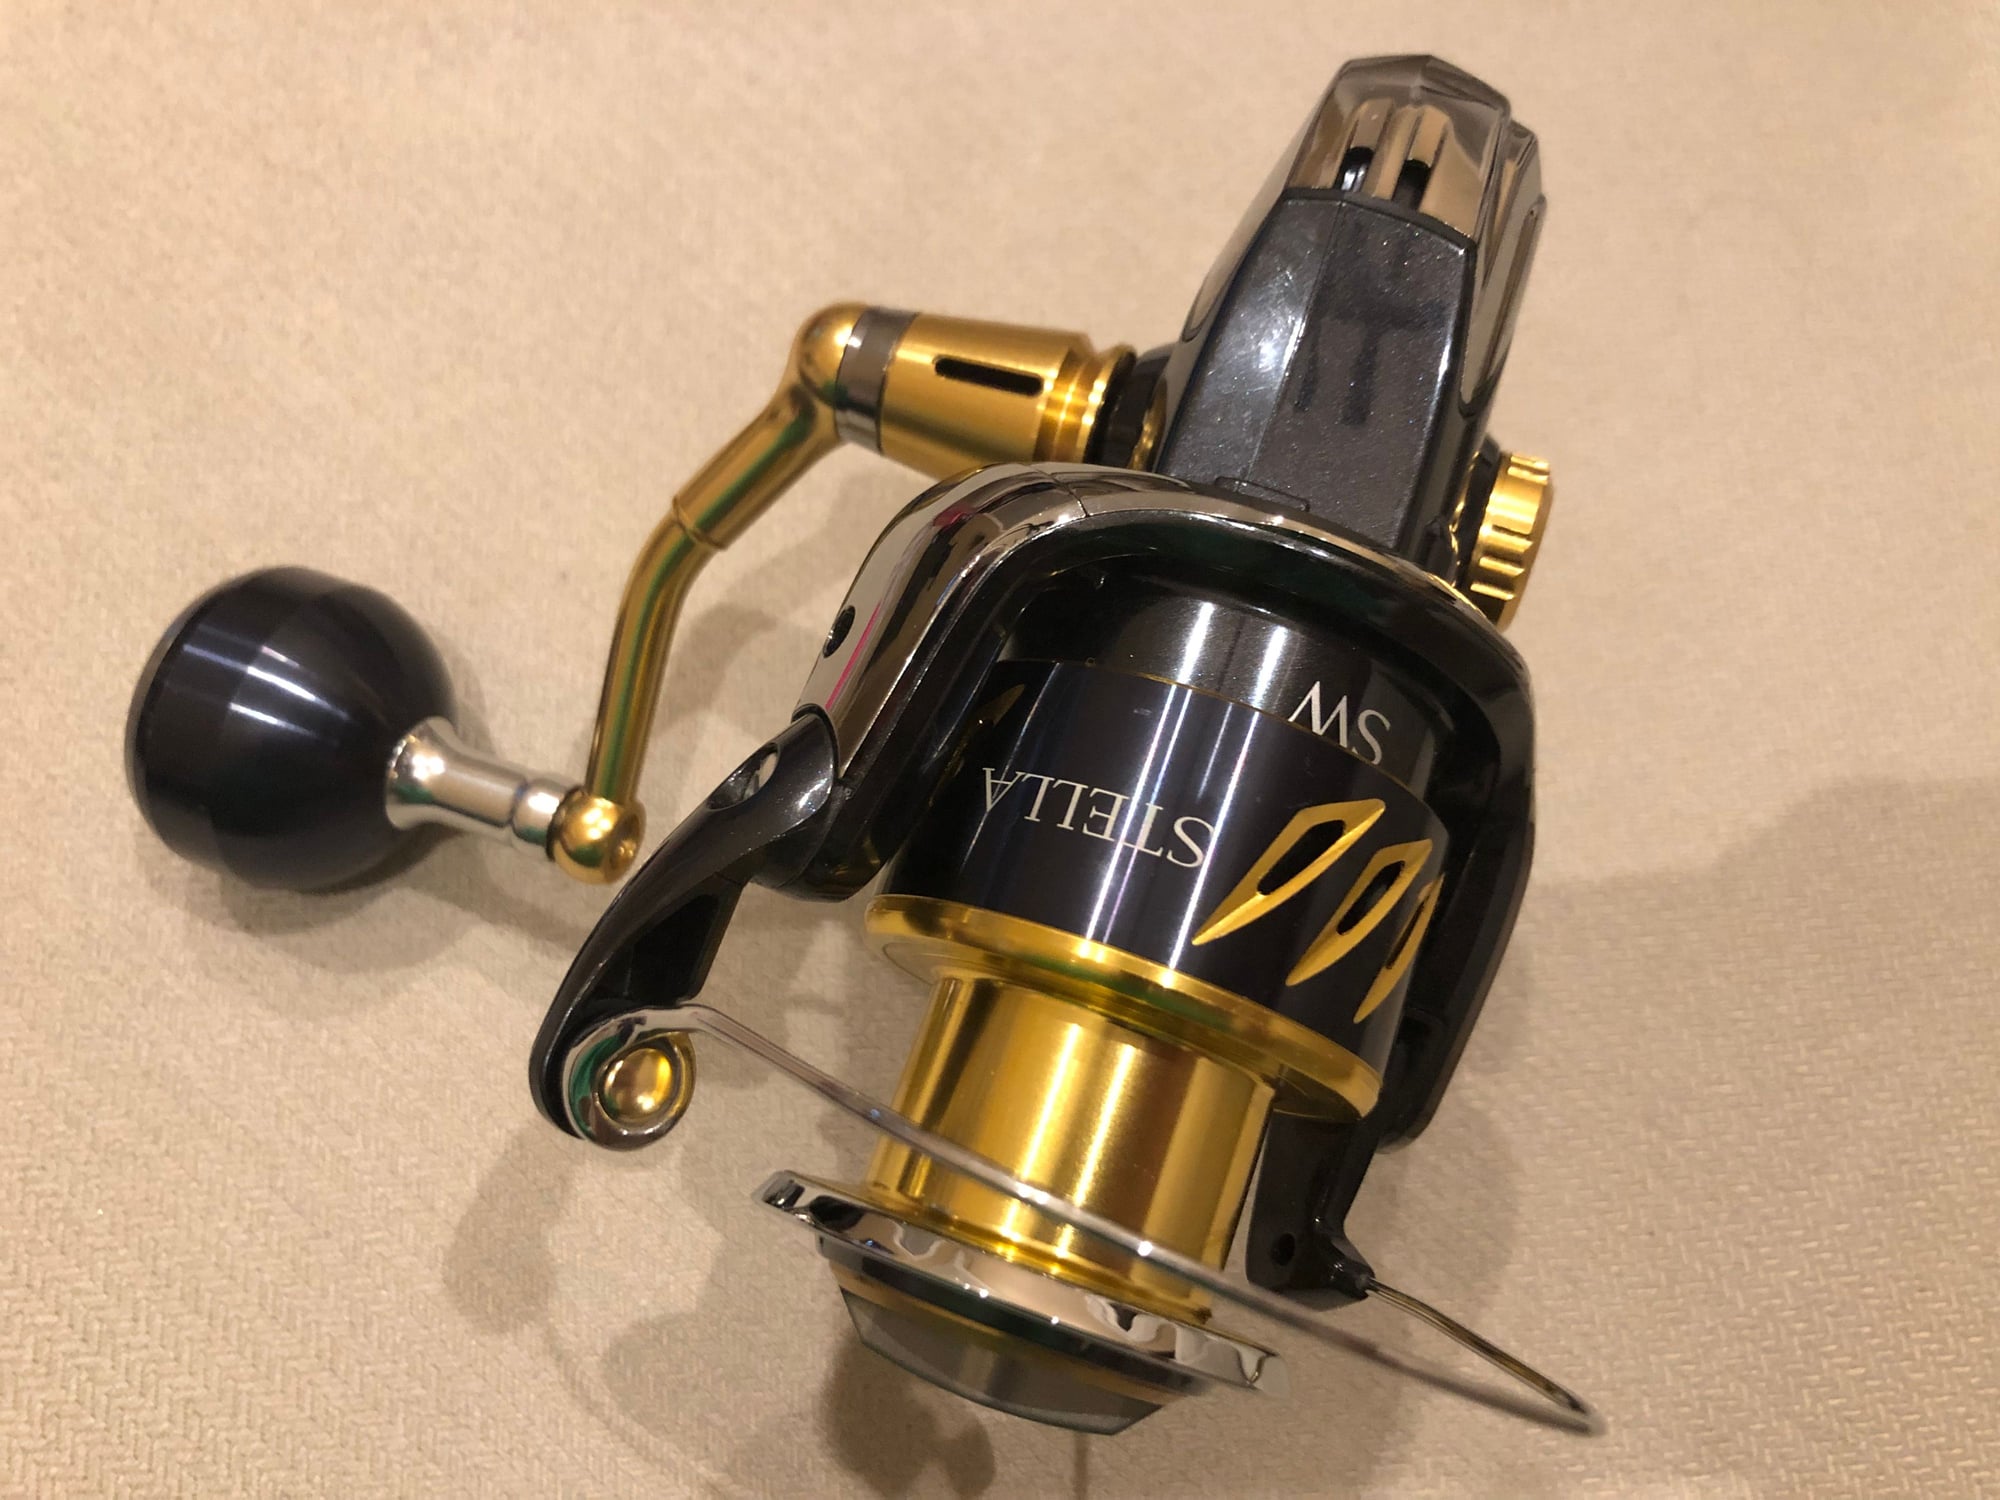 WTB: Handles from Shimano Stella or Sustain 4000/5000FD - The Hull Truth -  Boating and Fishing Forum